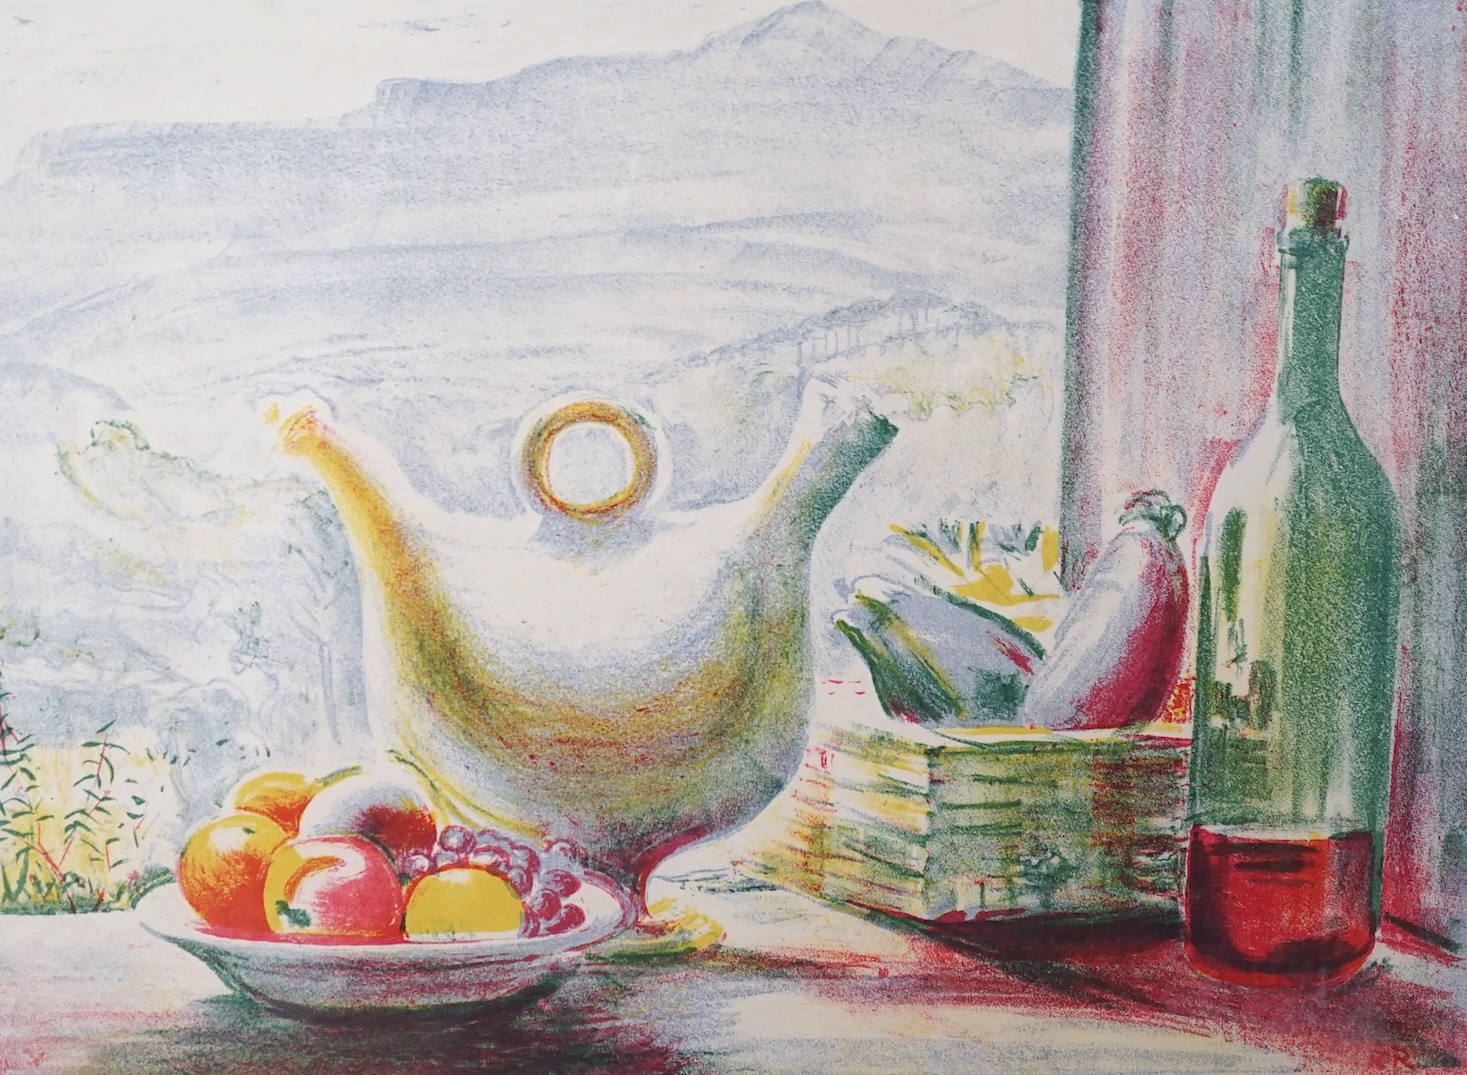 Sydney Russell Reeve (b.1895), lithograph, 'Window in Provence’, signed, 32 x 40cm, unframed. Condition - fair